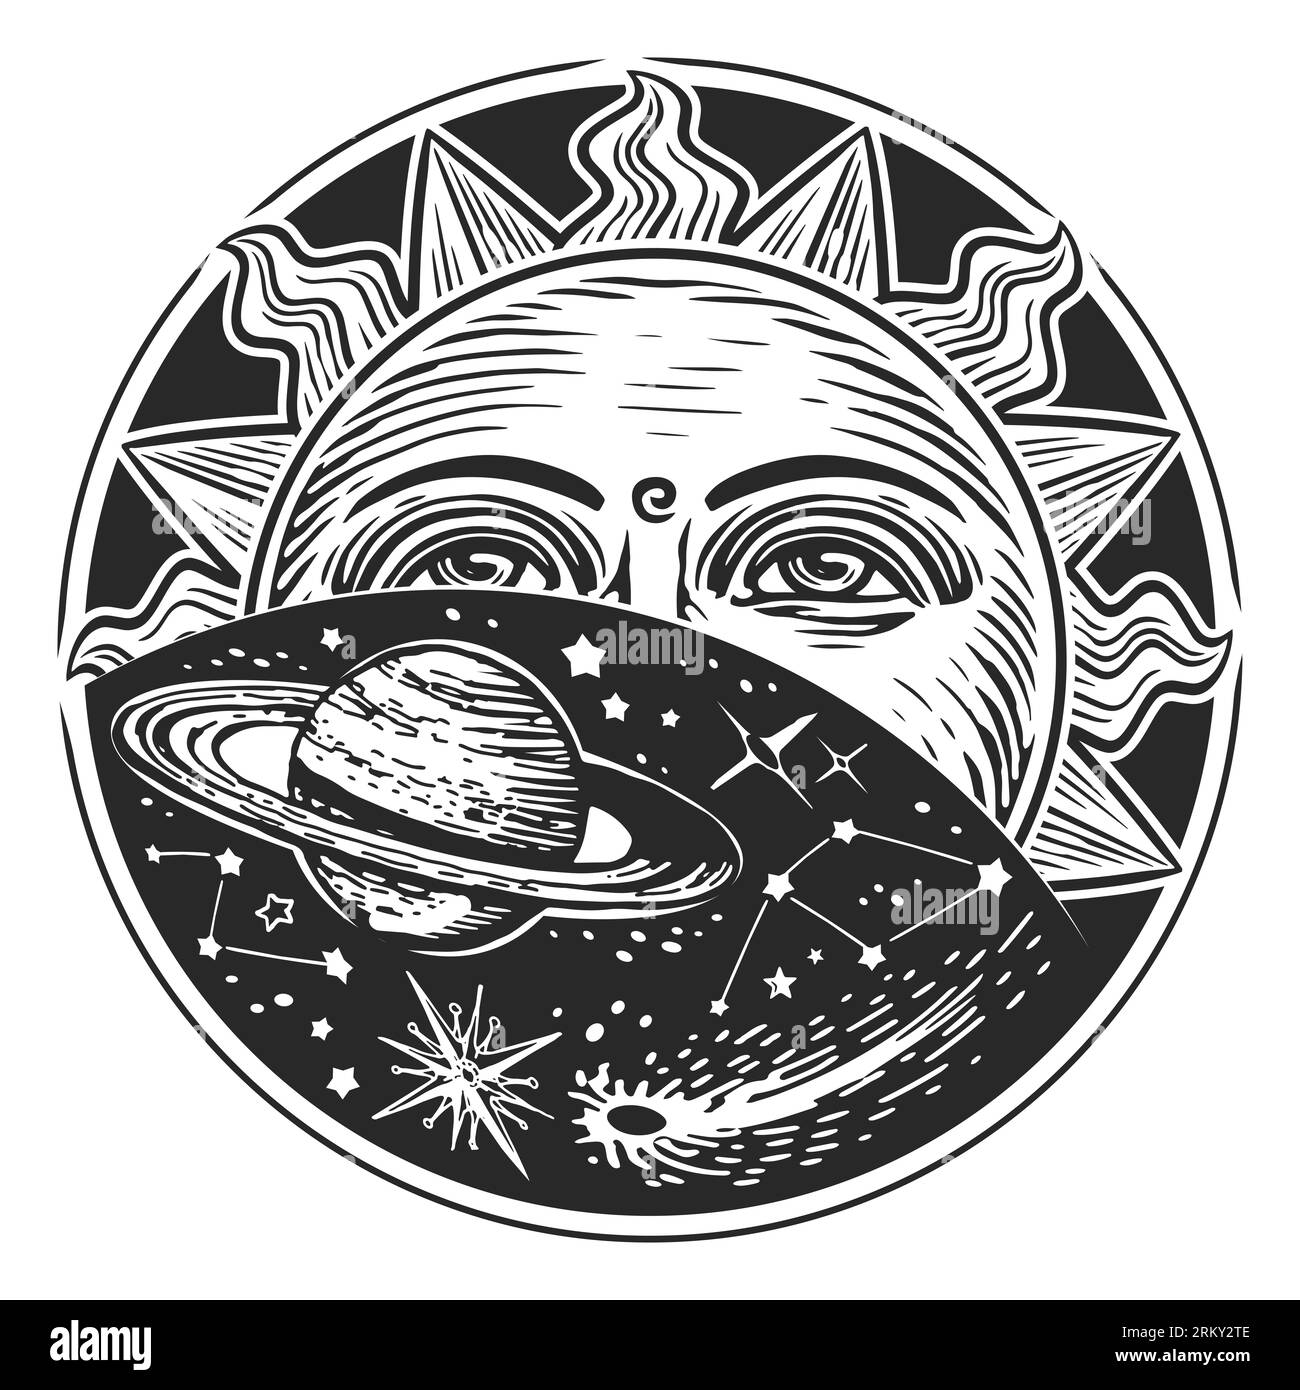 Space exploration, astronomy concept. Sun, stars and planets. Vintage illustration engraving style Stock Photo